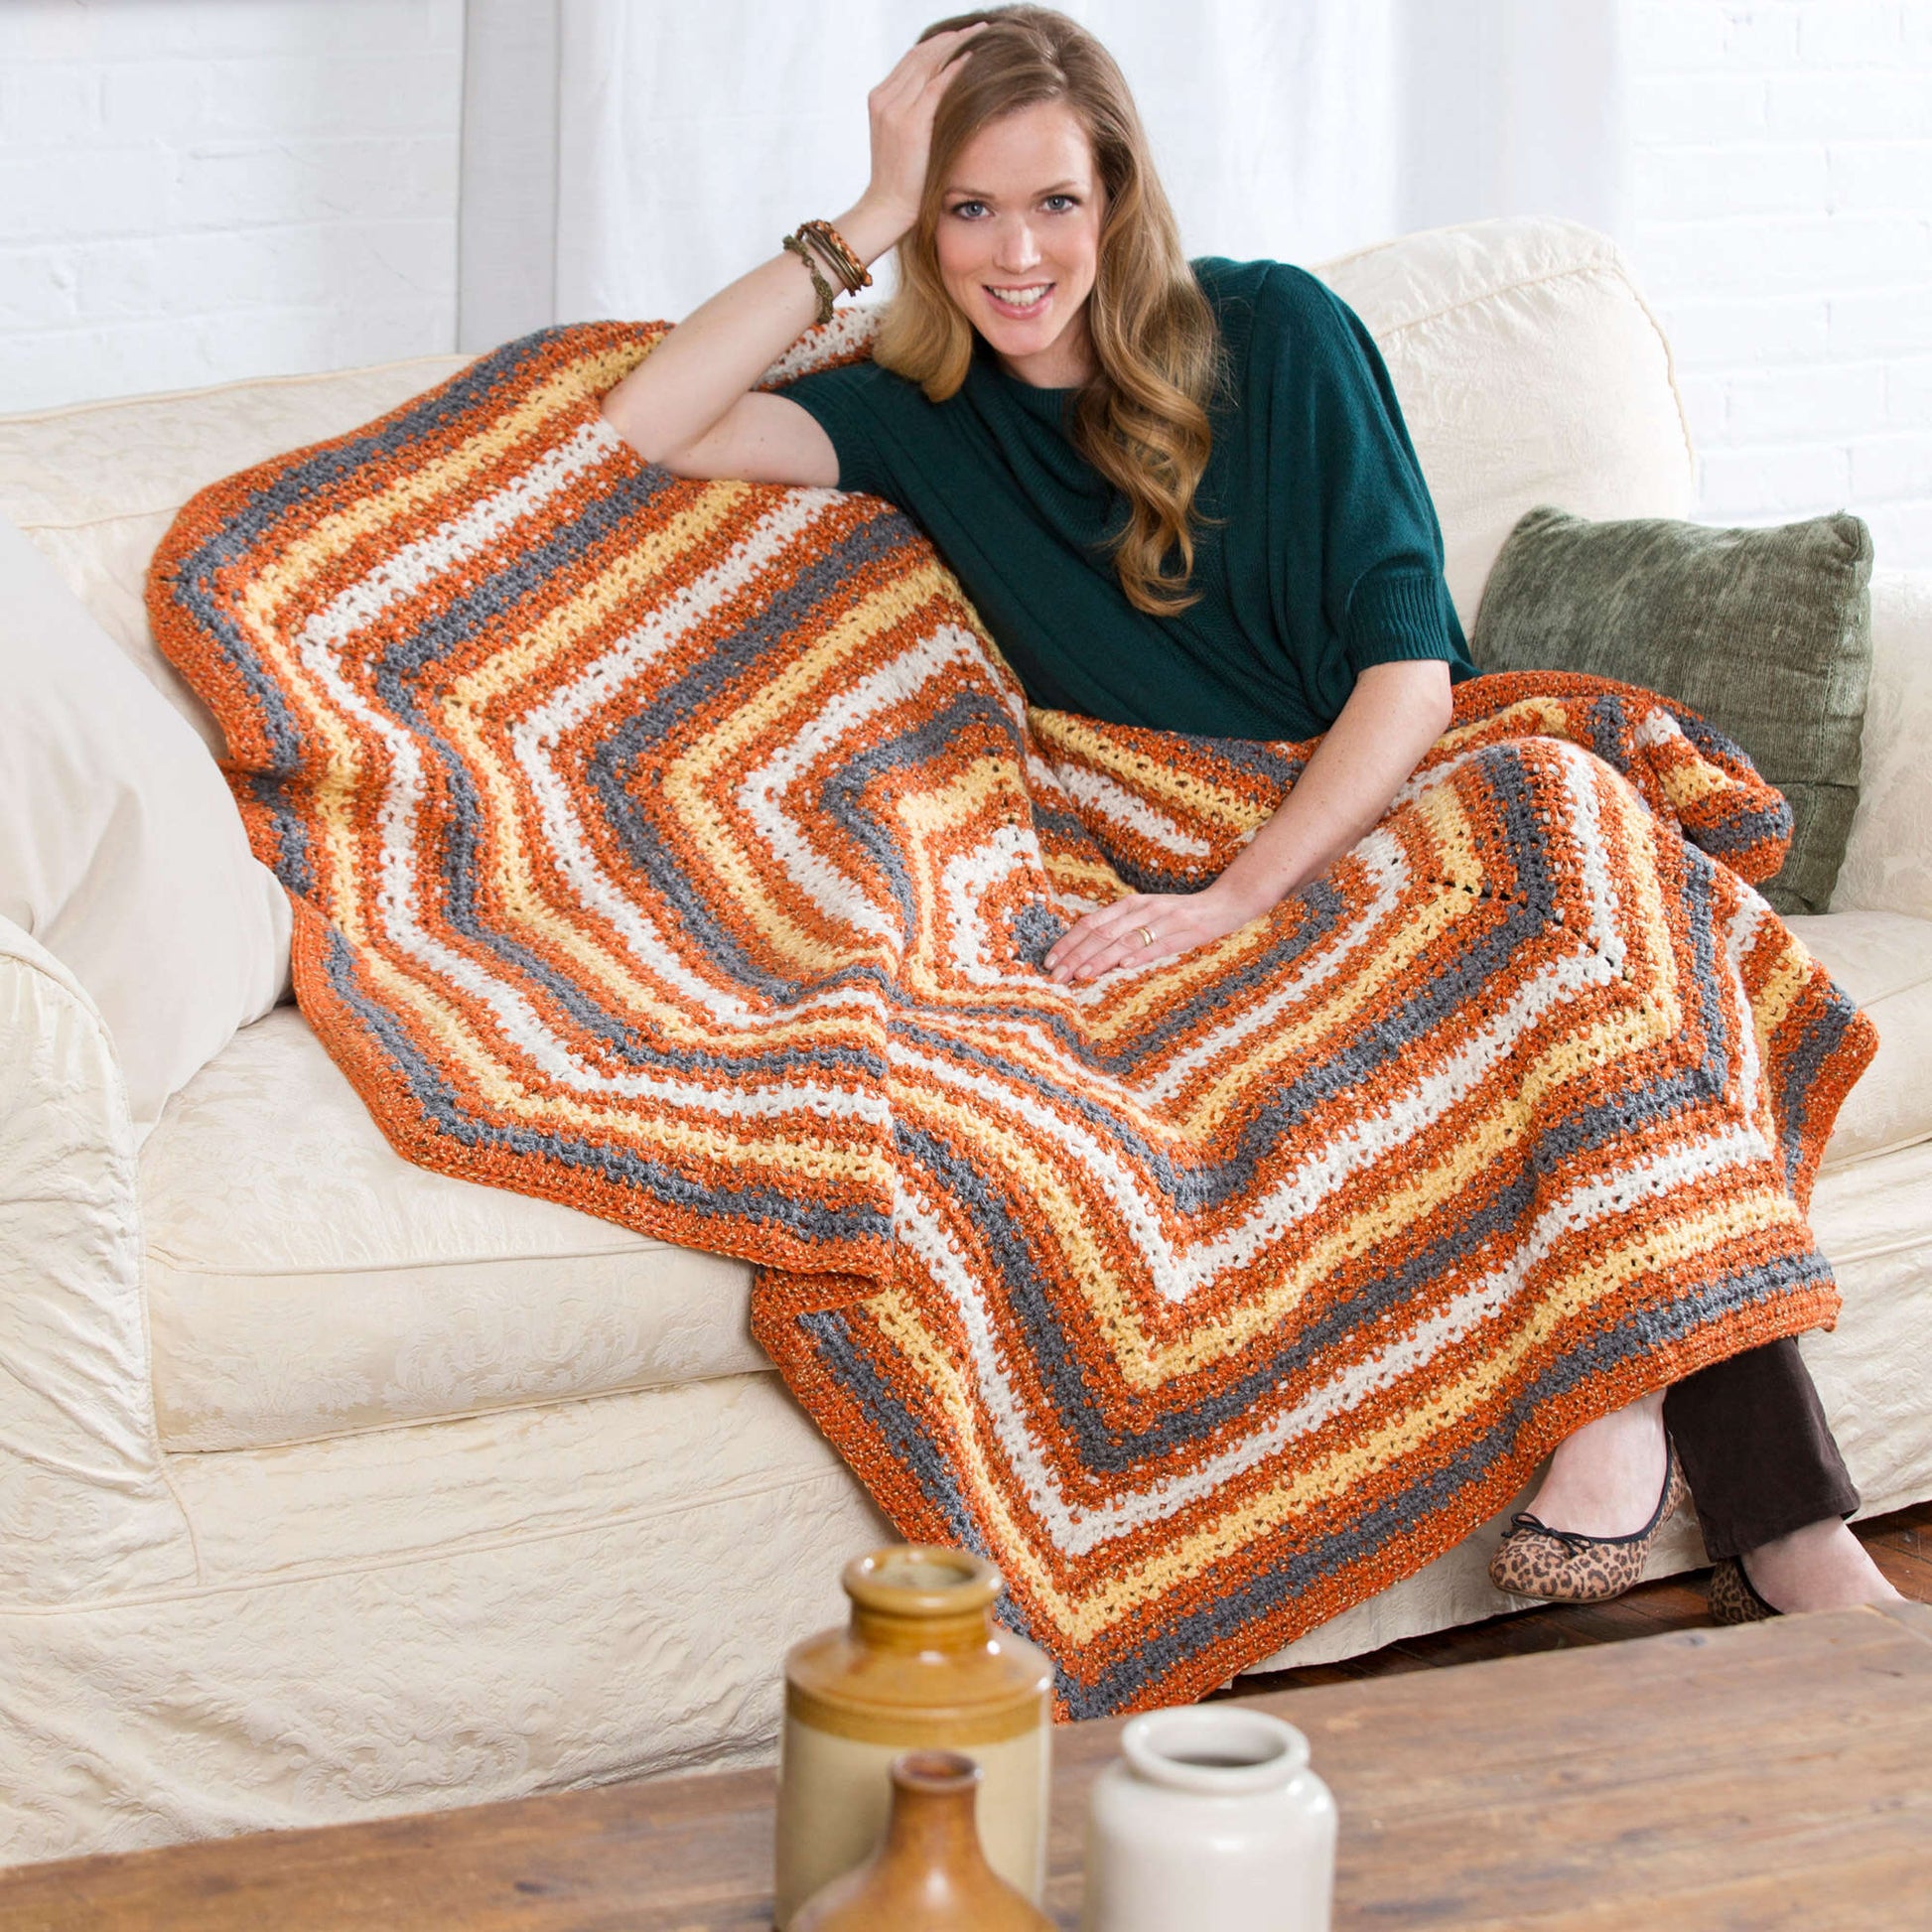 Free Red Heart Autumn Throw Pattern